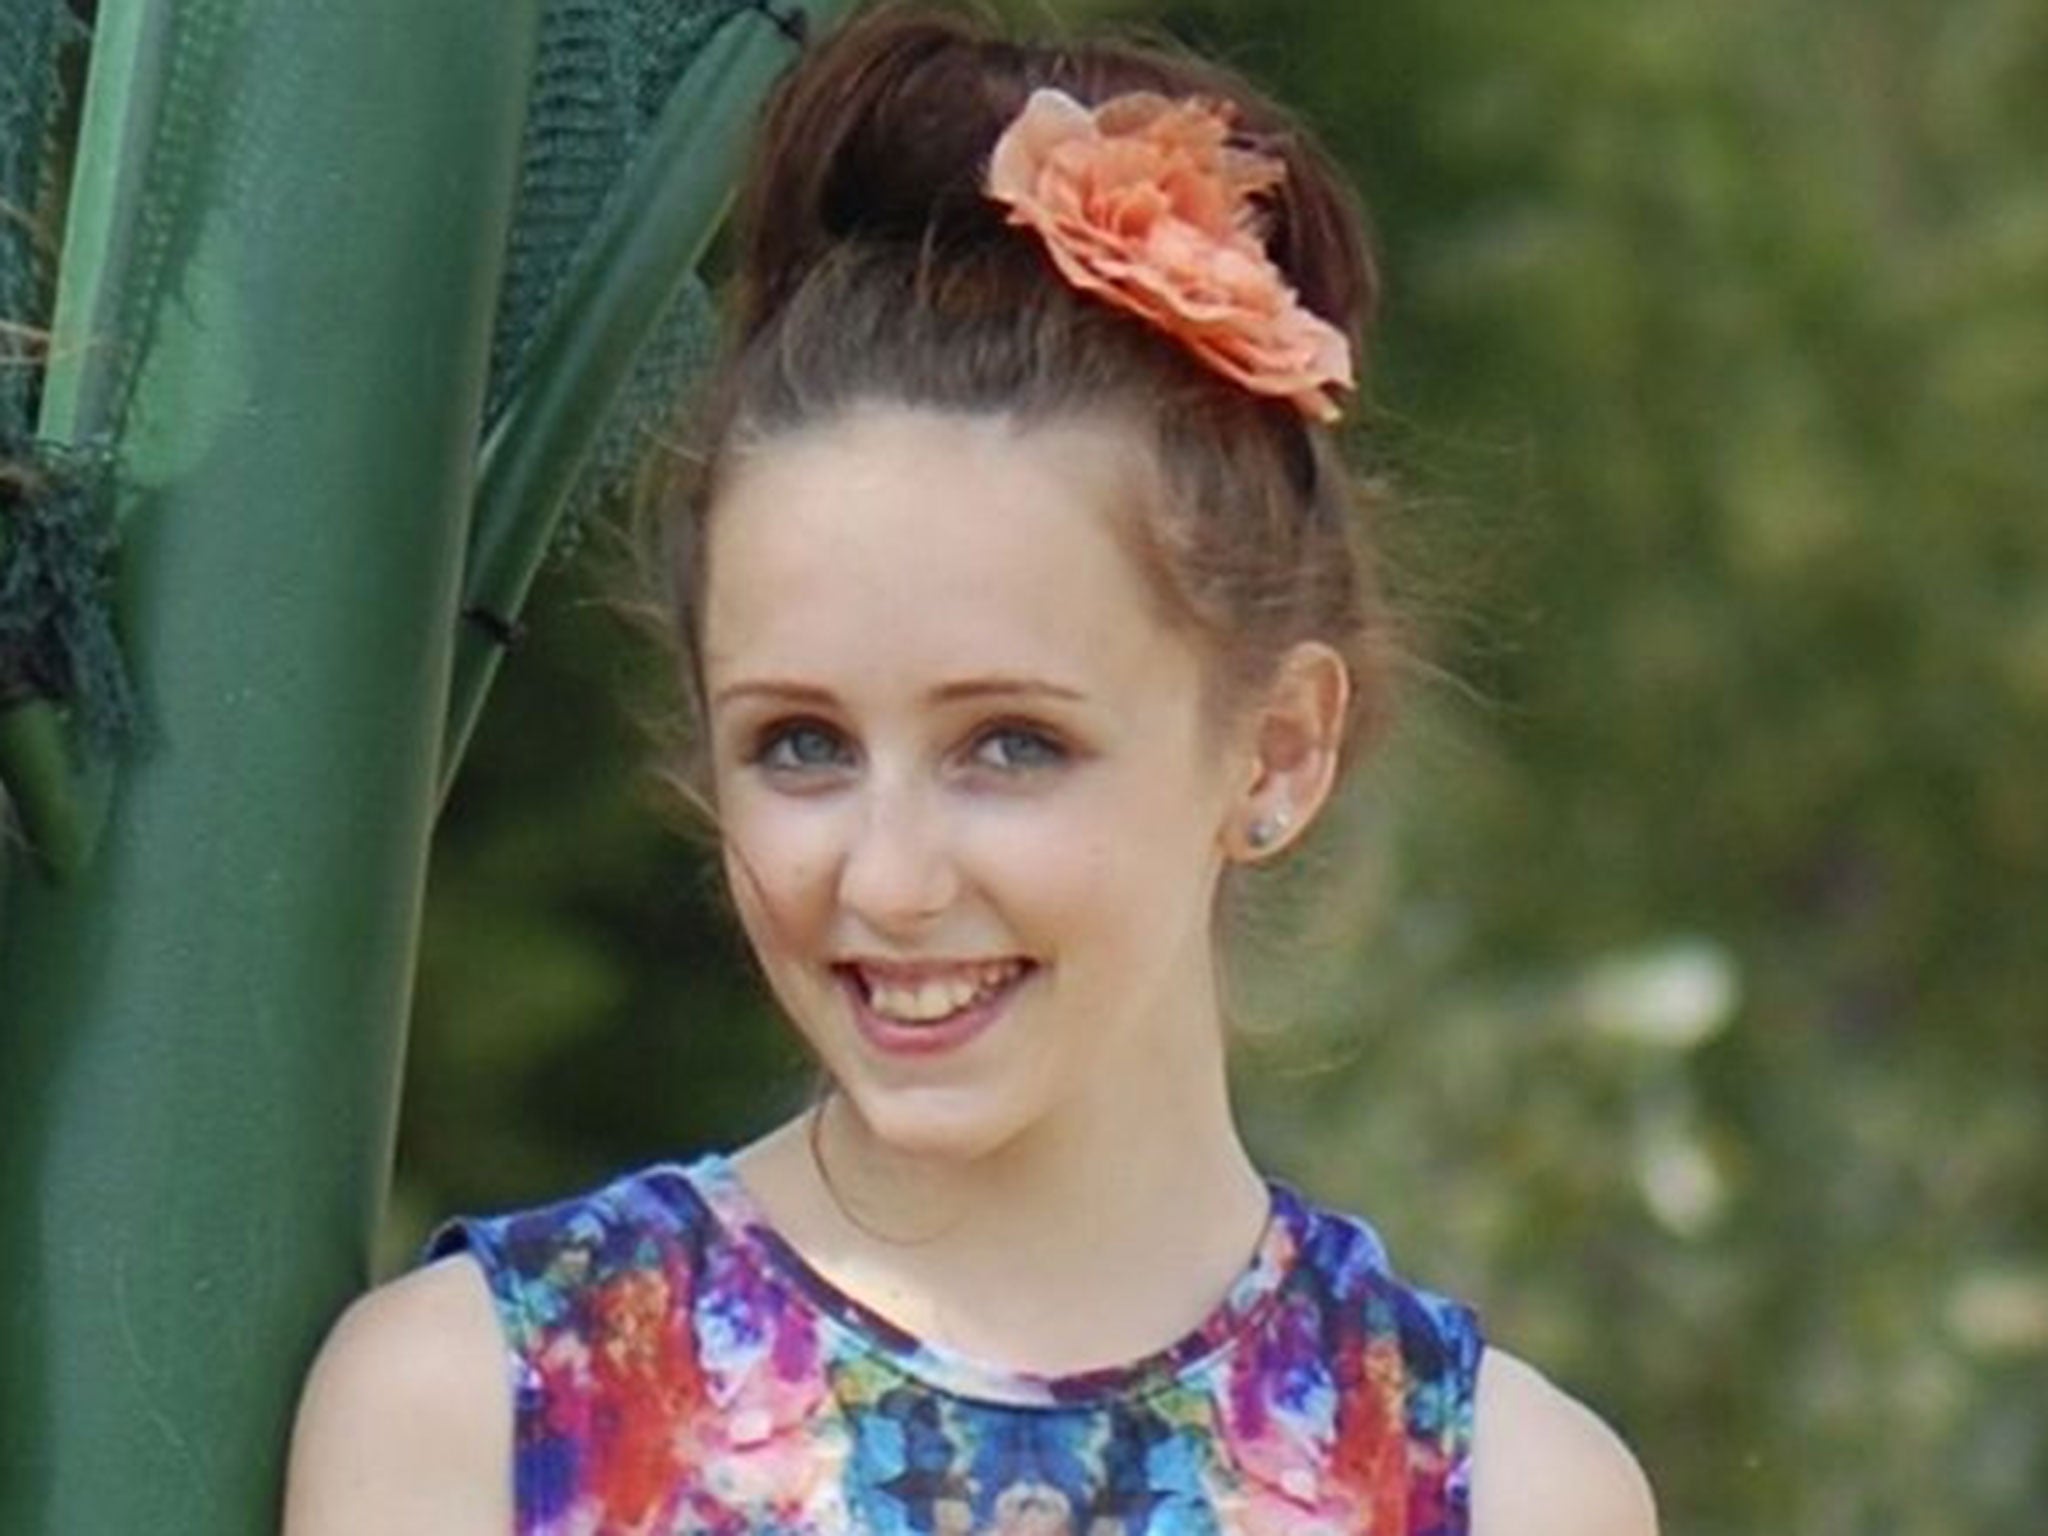 14-year-old Alice Gross, whose body was found in the River Brent